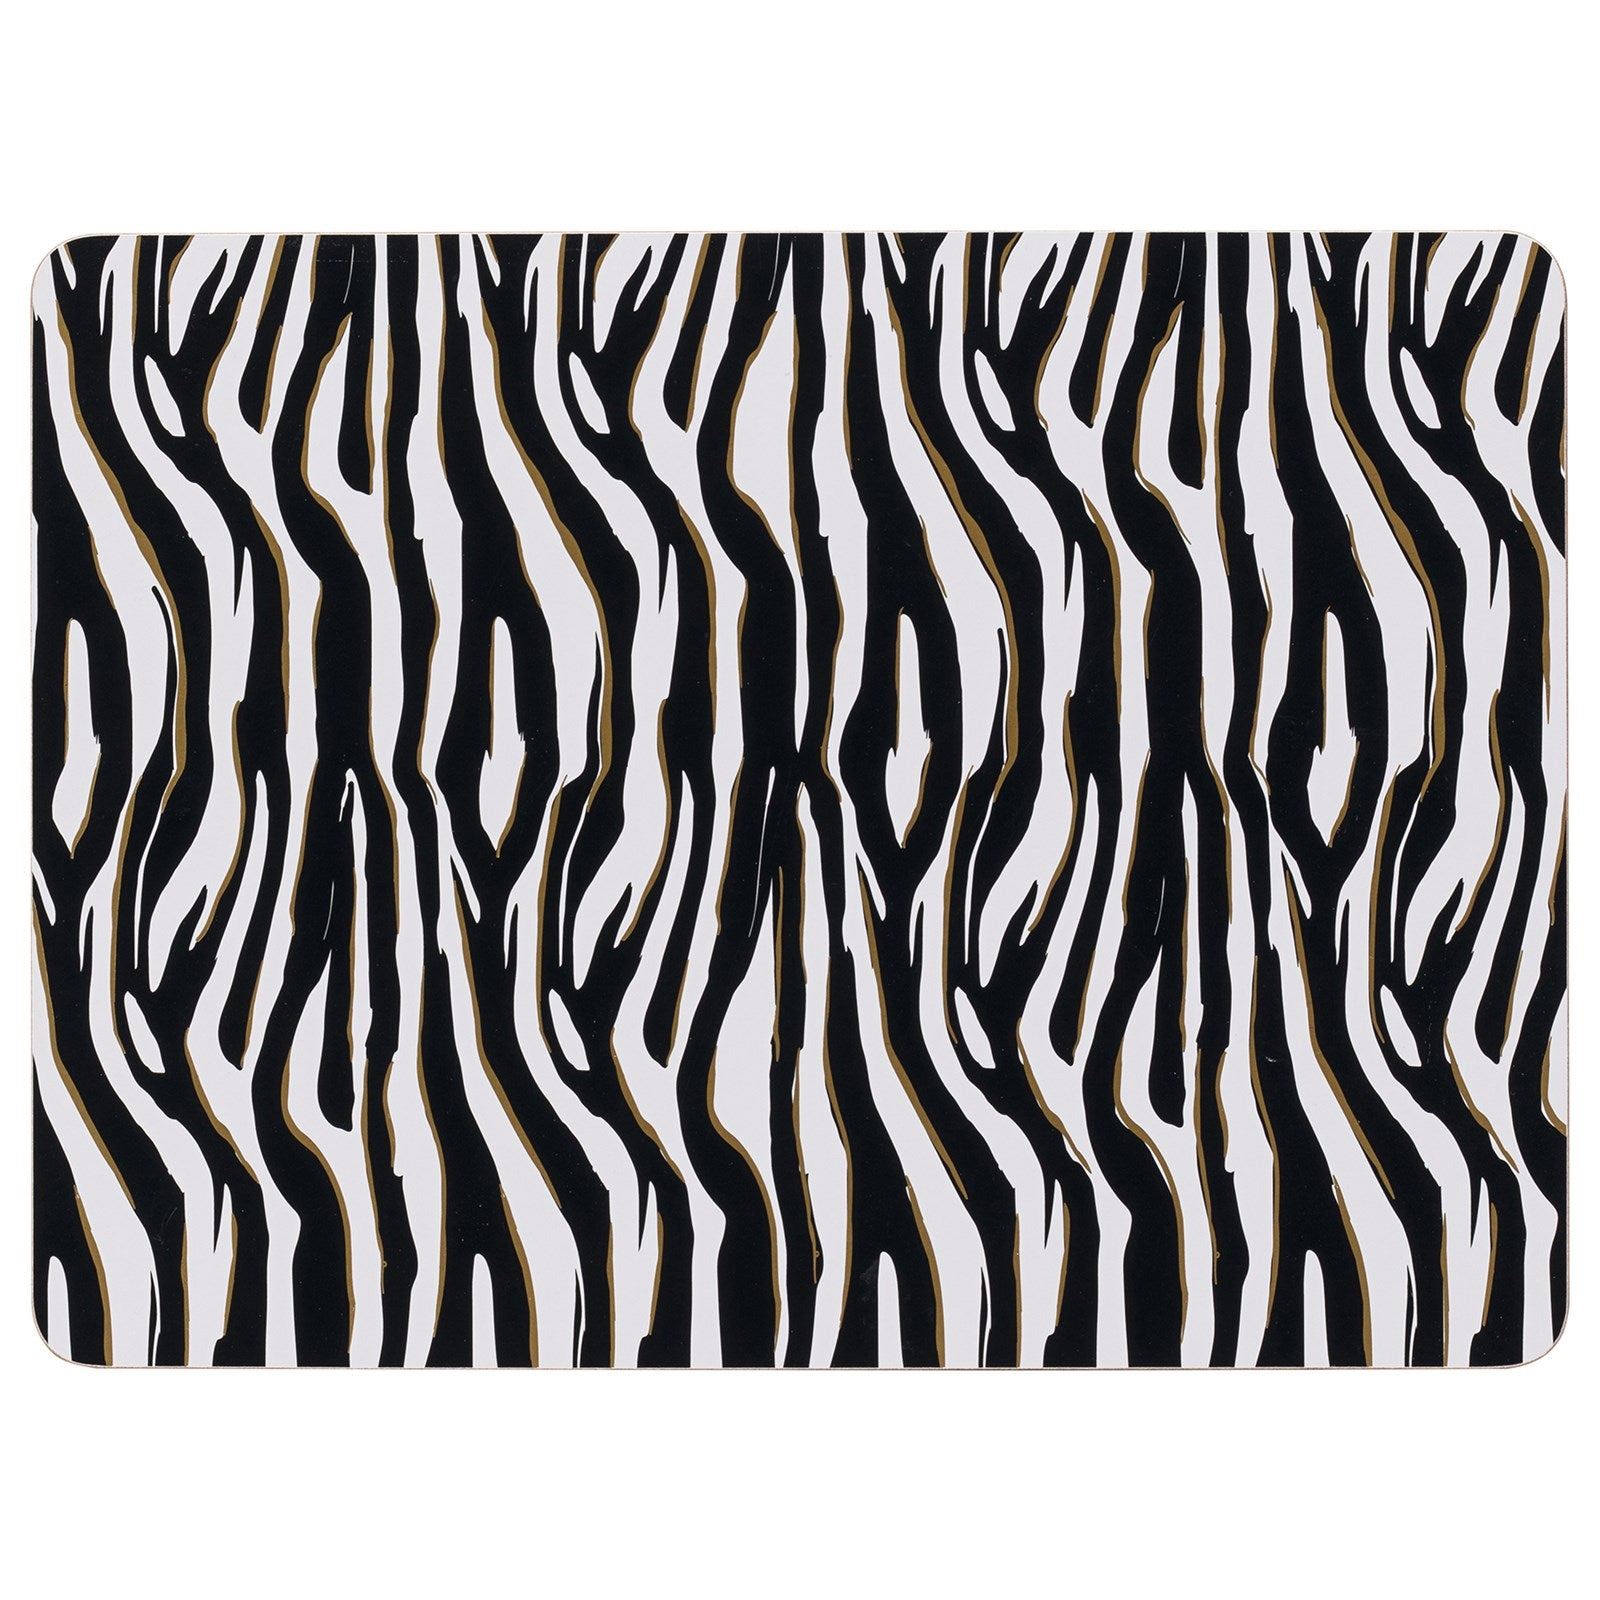 Looking Wild Looking Wild Set of 4 Placemats